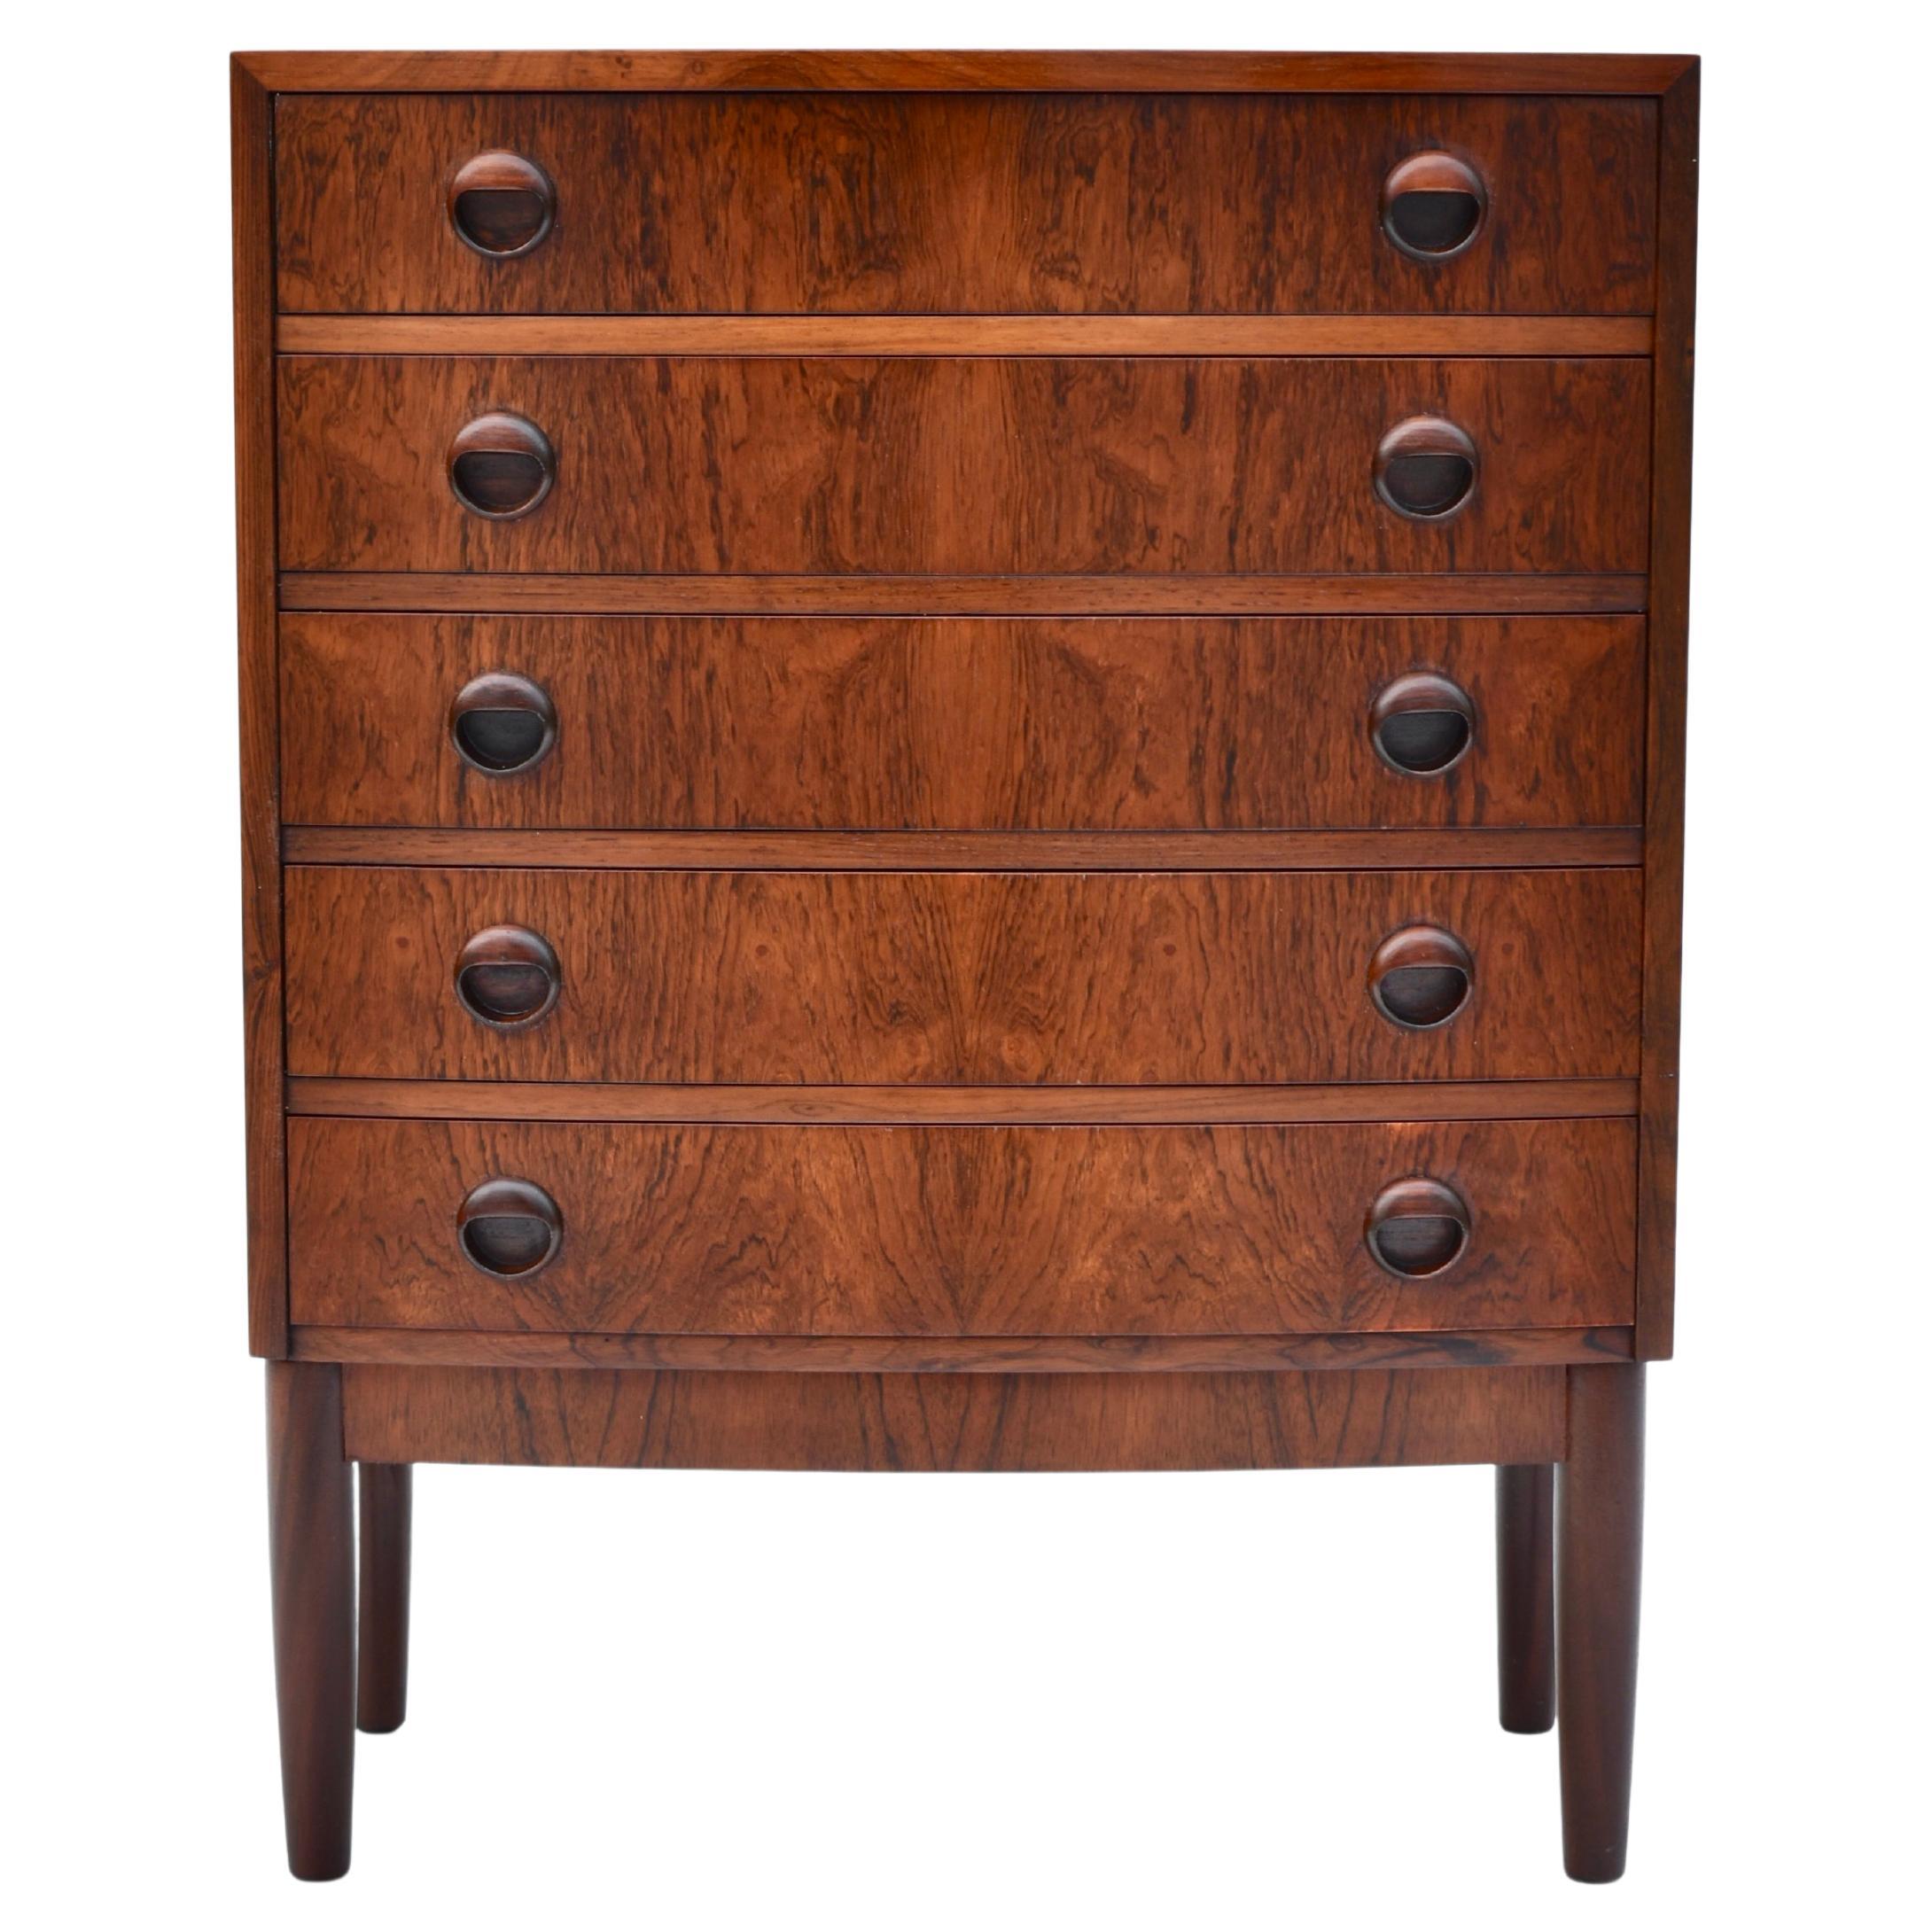 Kai Kristiansen Bow Fronted Brazilian Rosewood Chest of Drawers